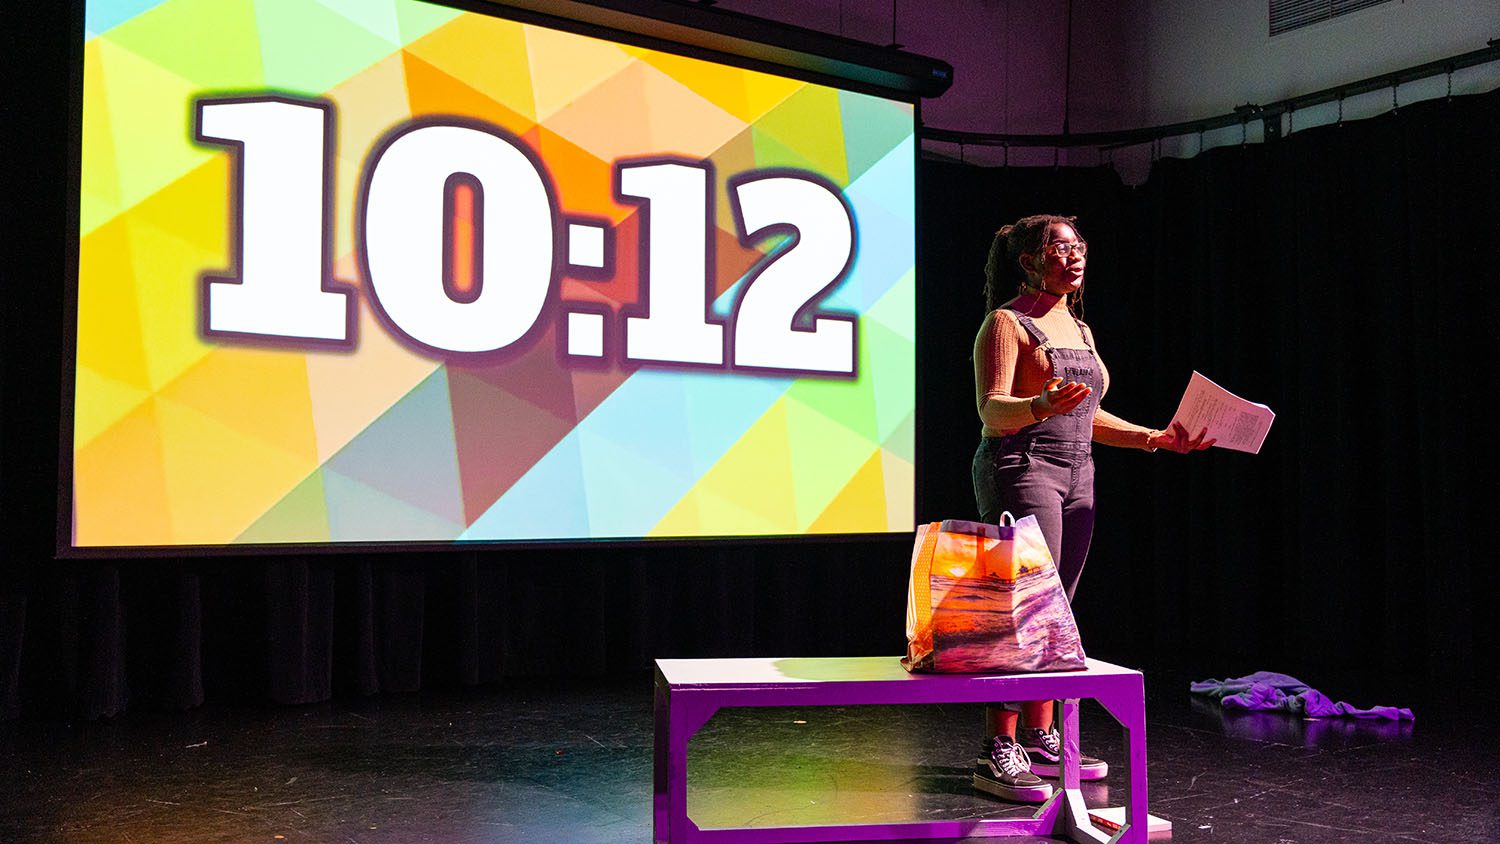 A black woman wearing overalls stands on stage in front of a colorful screen that reads 10:12